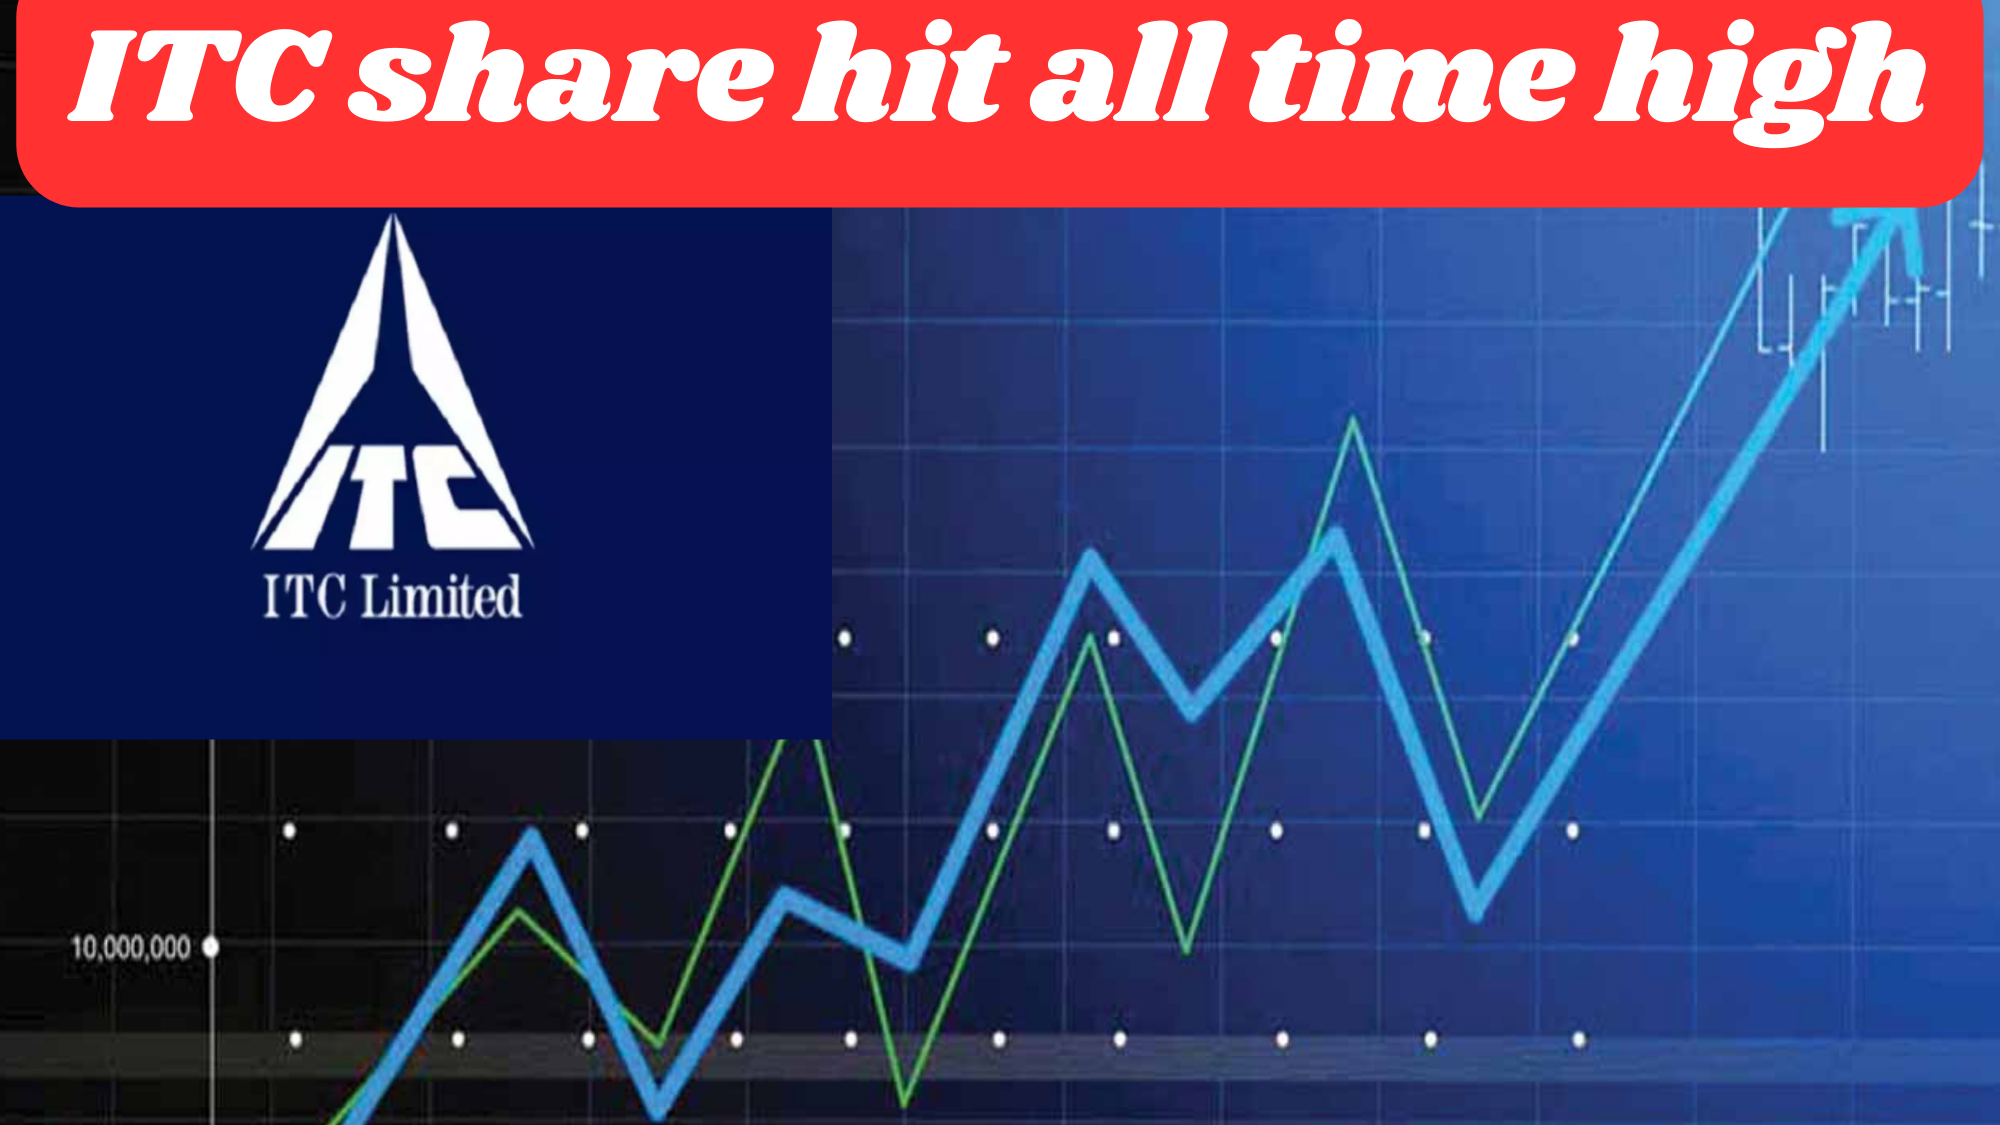 ITC share hit all time high; Declared dividend Rs 9.50.